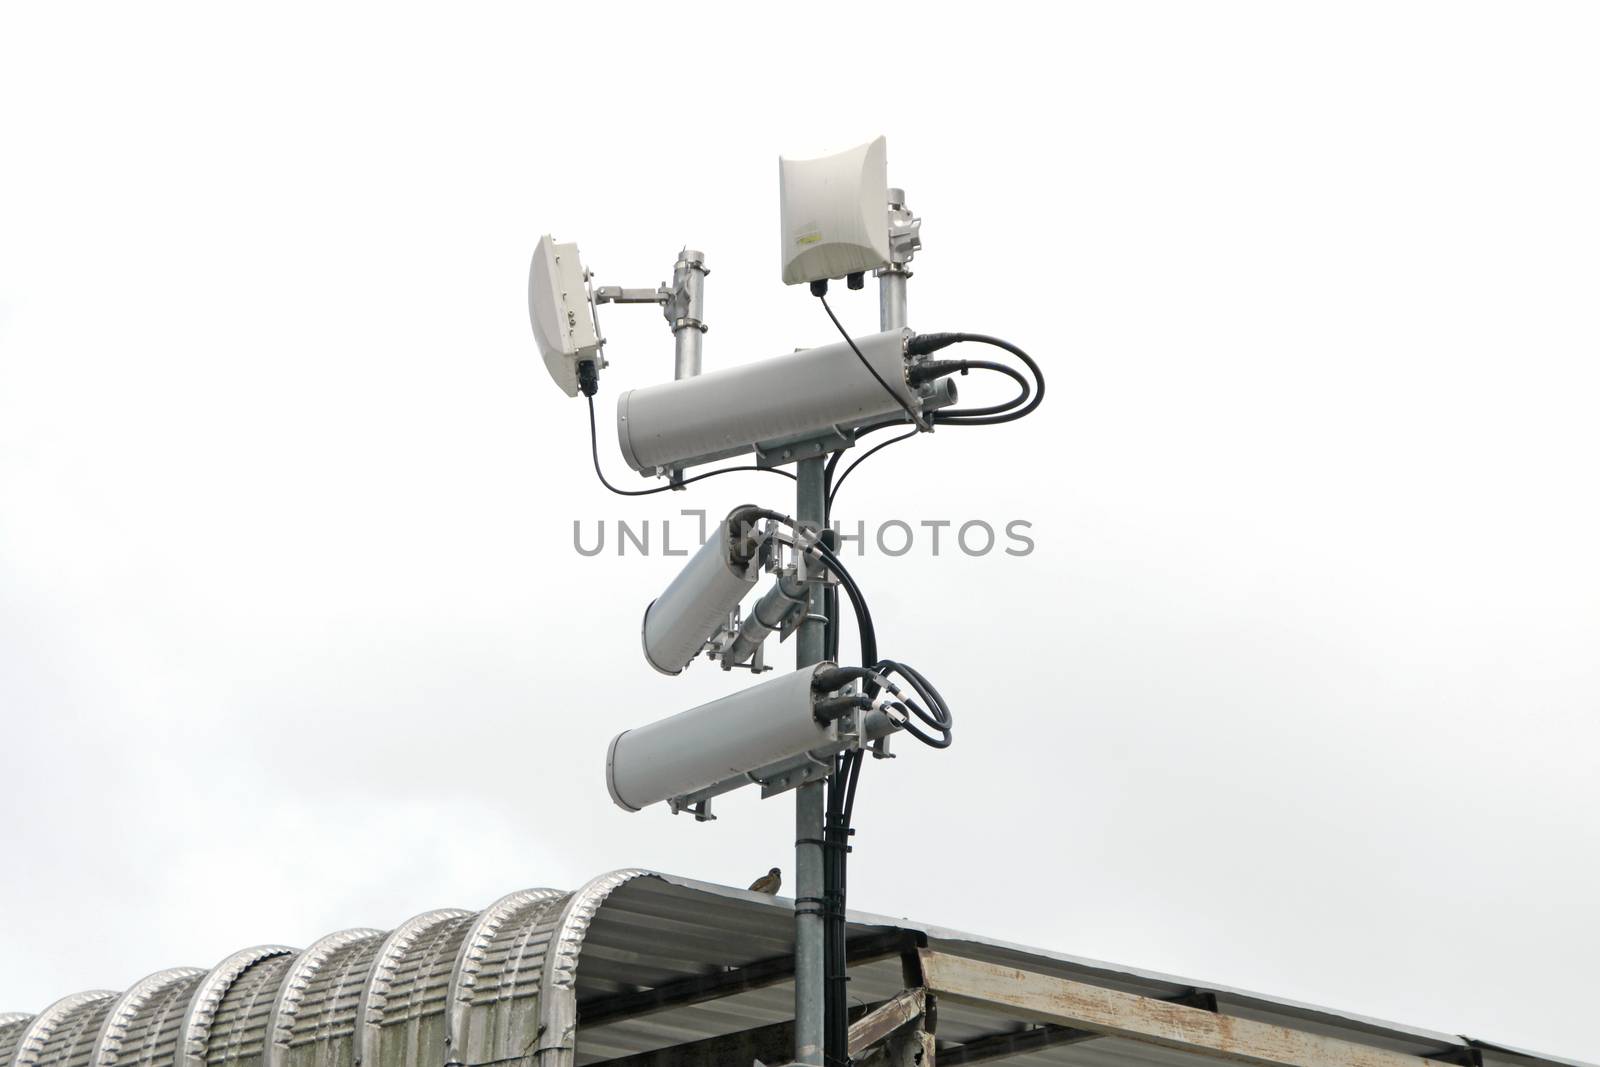 Antennas of mobile cellular systems with wifi hot spot repeater and blue sky